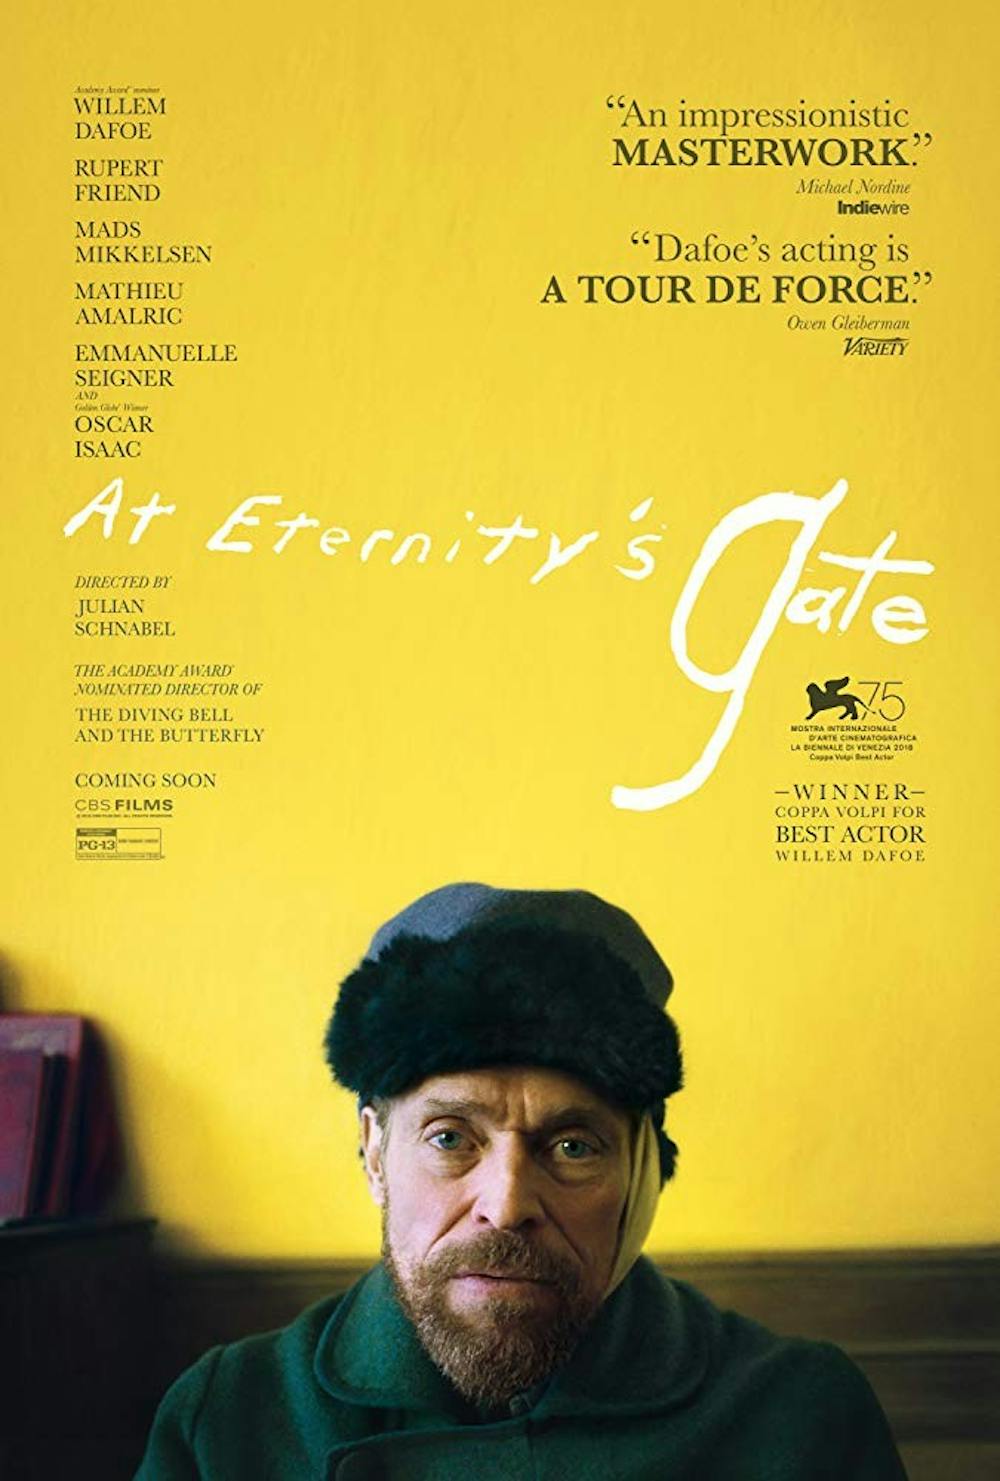 <p>Willem Dafoe's masterful portrayal of Vincent van Gogh's tortured last years makes the messiness of "At Eternity's Gate" merited.</p>